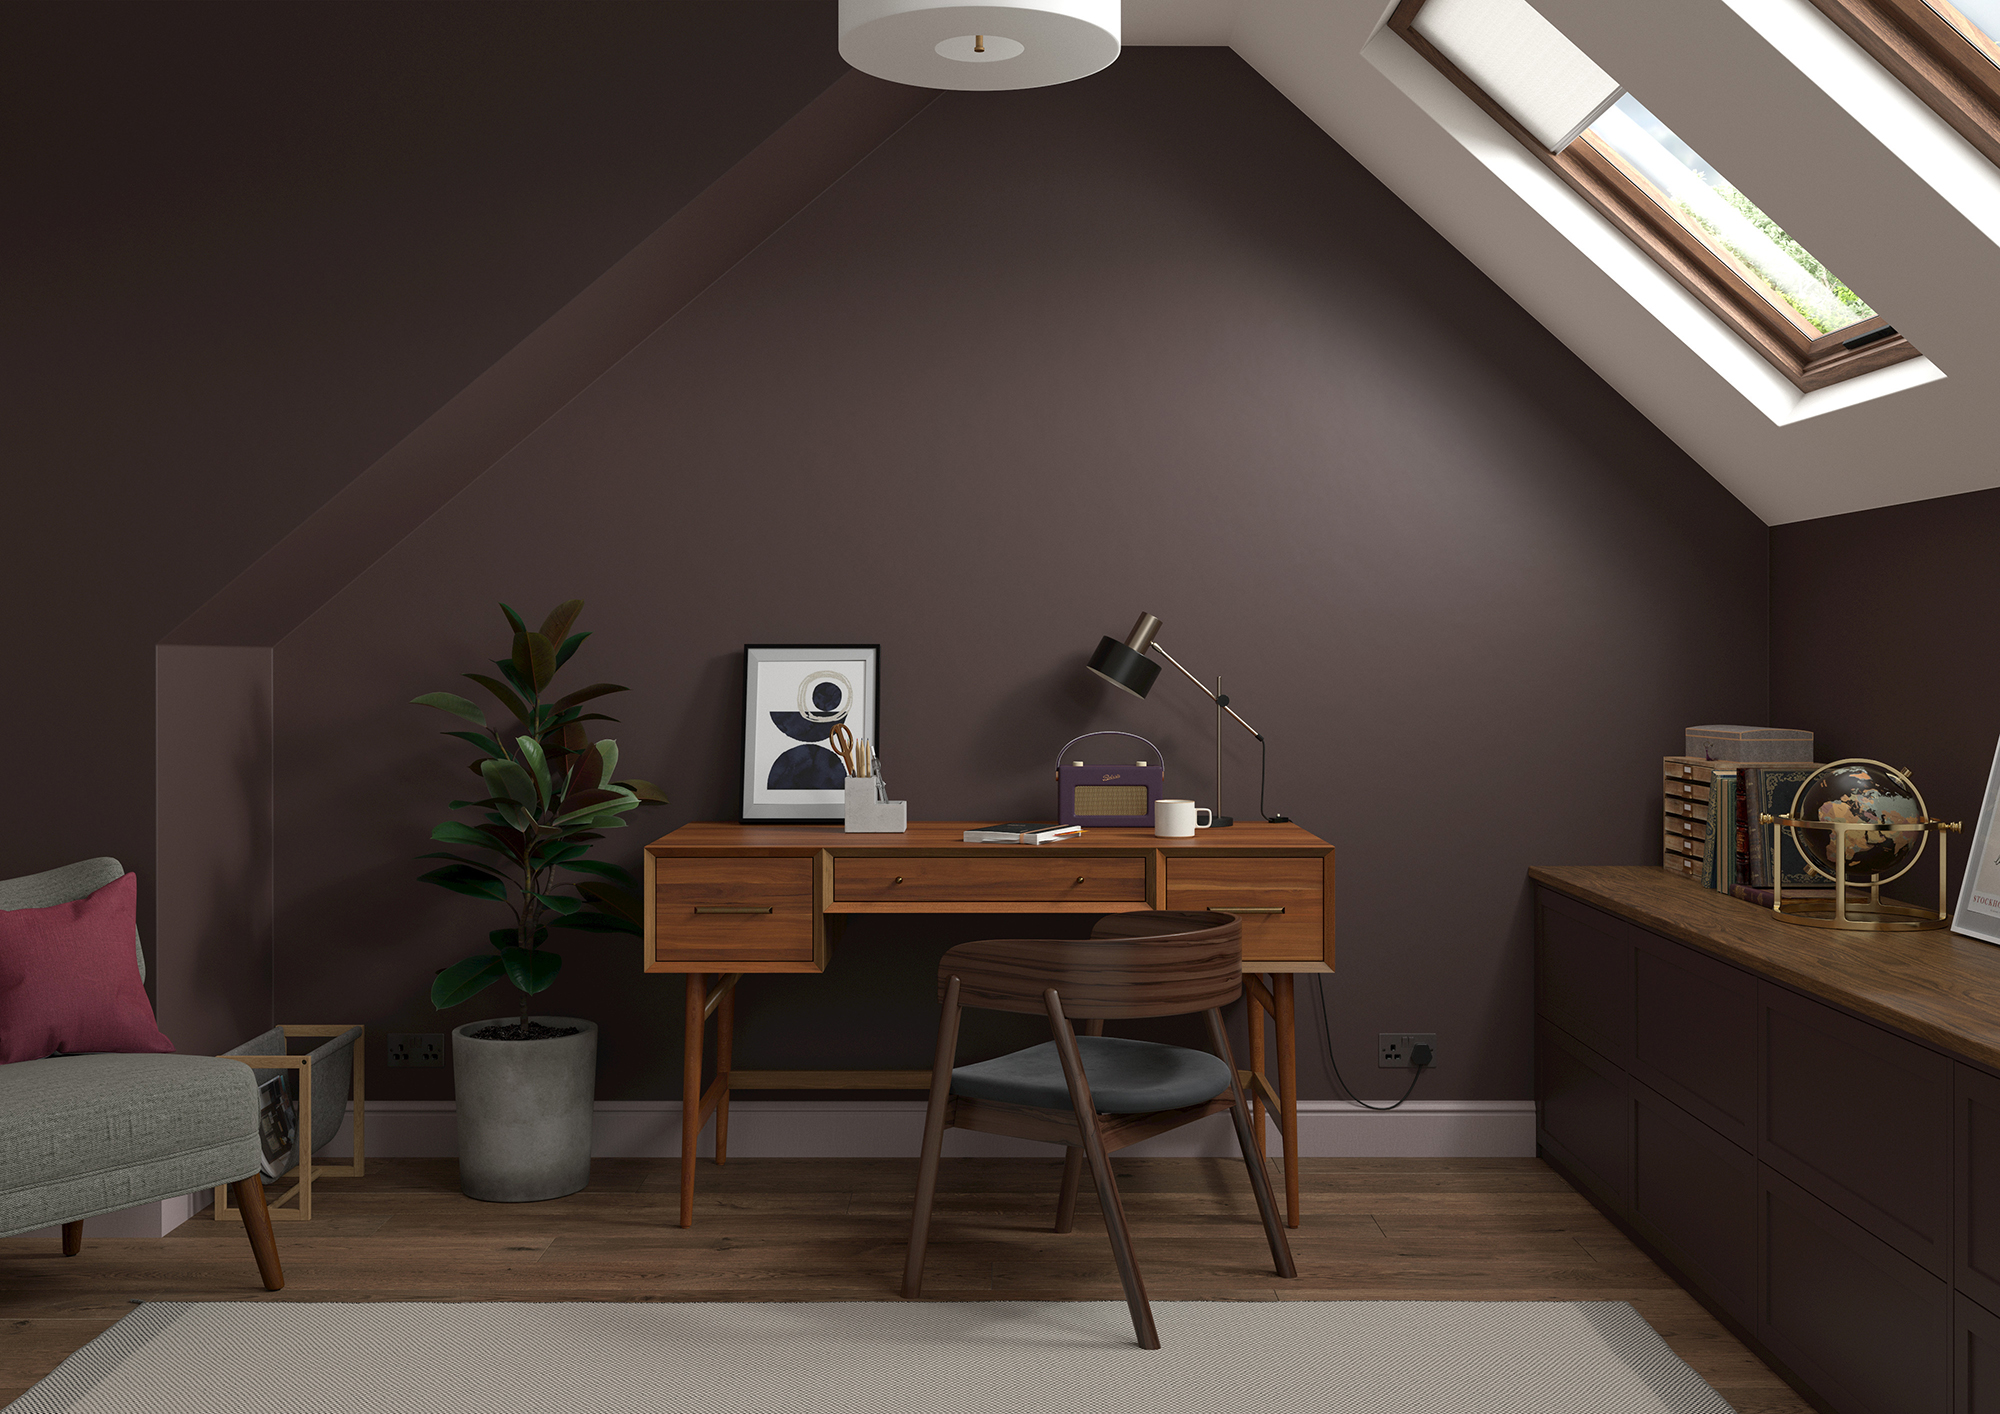 Office   Wall   Cherry Truffle, Woodwork   Dusted Heather, Ceiling   Roman White, Cabinet   Cherry Truffle